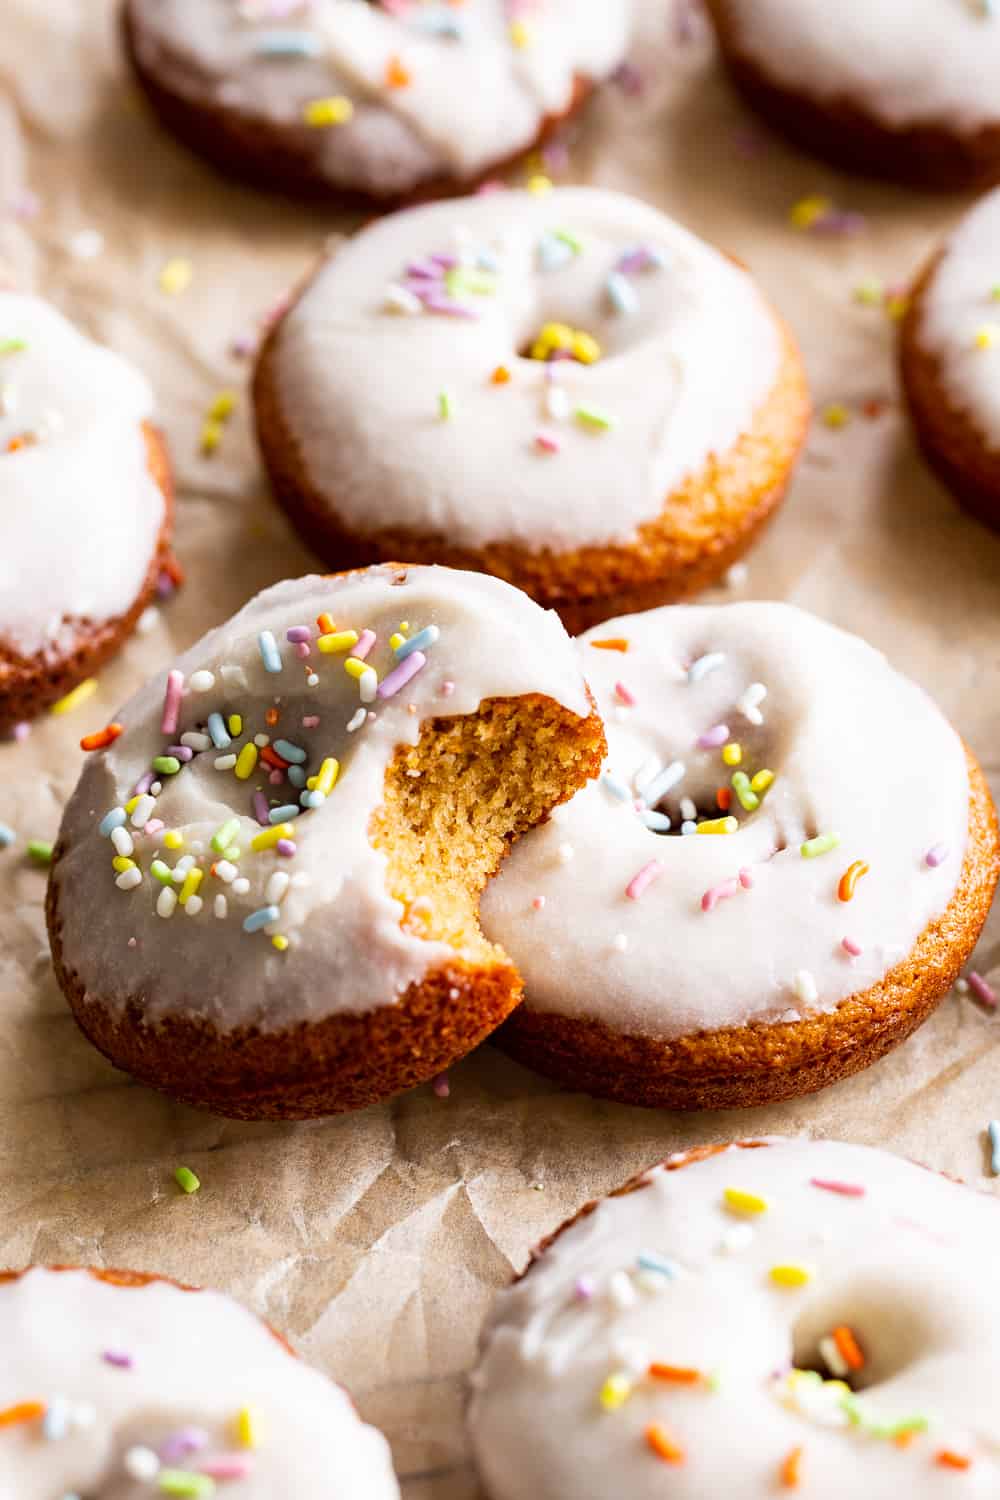 These paleo vanilla frosted donuts are a huge treat and easy to make, too! Healthy gluten free and dairy free baked donuts are dipped in a creamy vanilla frosting for a fun treat everyone will love. If you don't have a donut pan, make them into cupcakes! #paleo #cleaneating #glutenfree